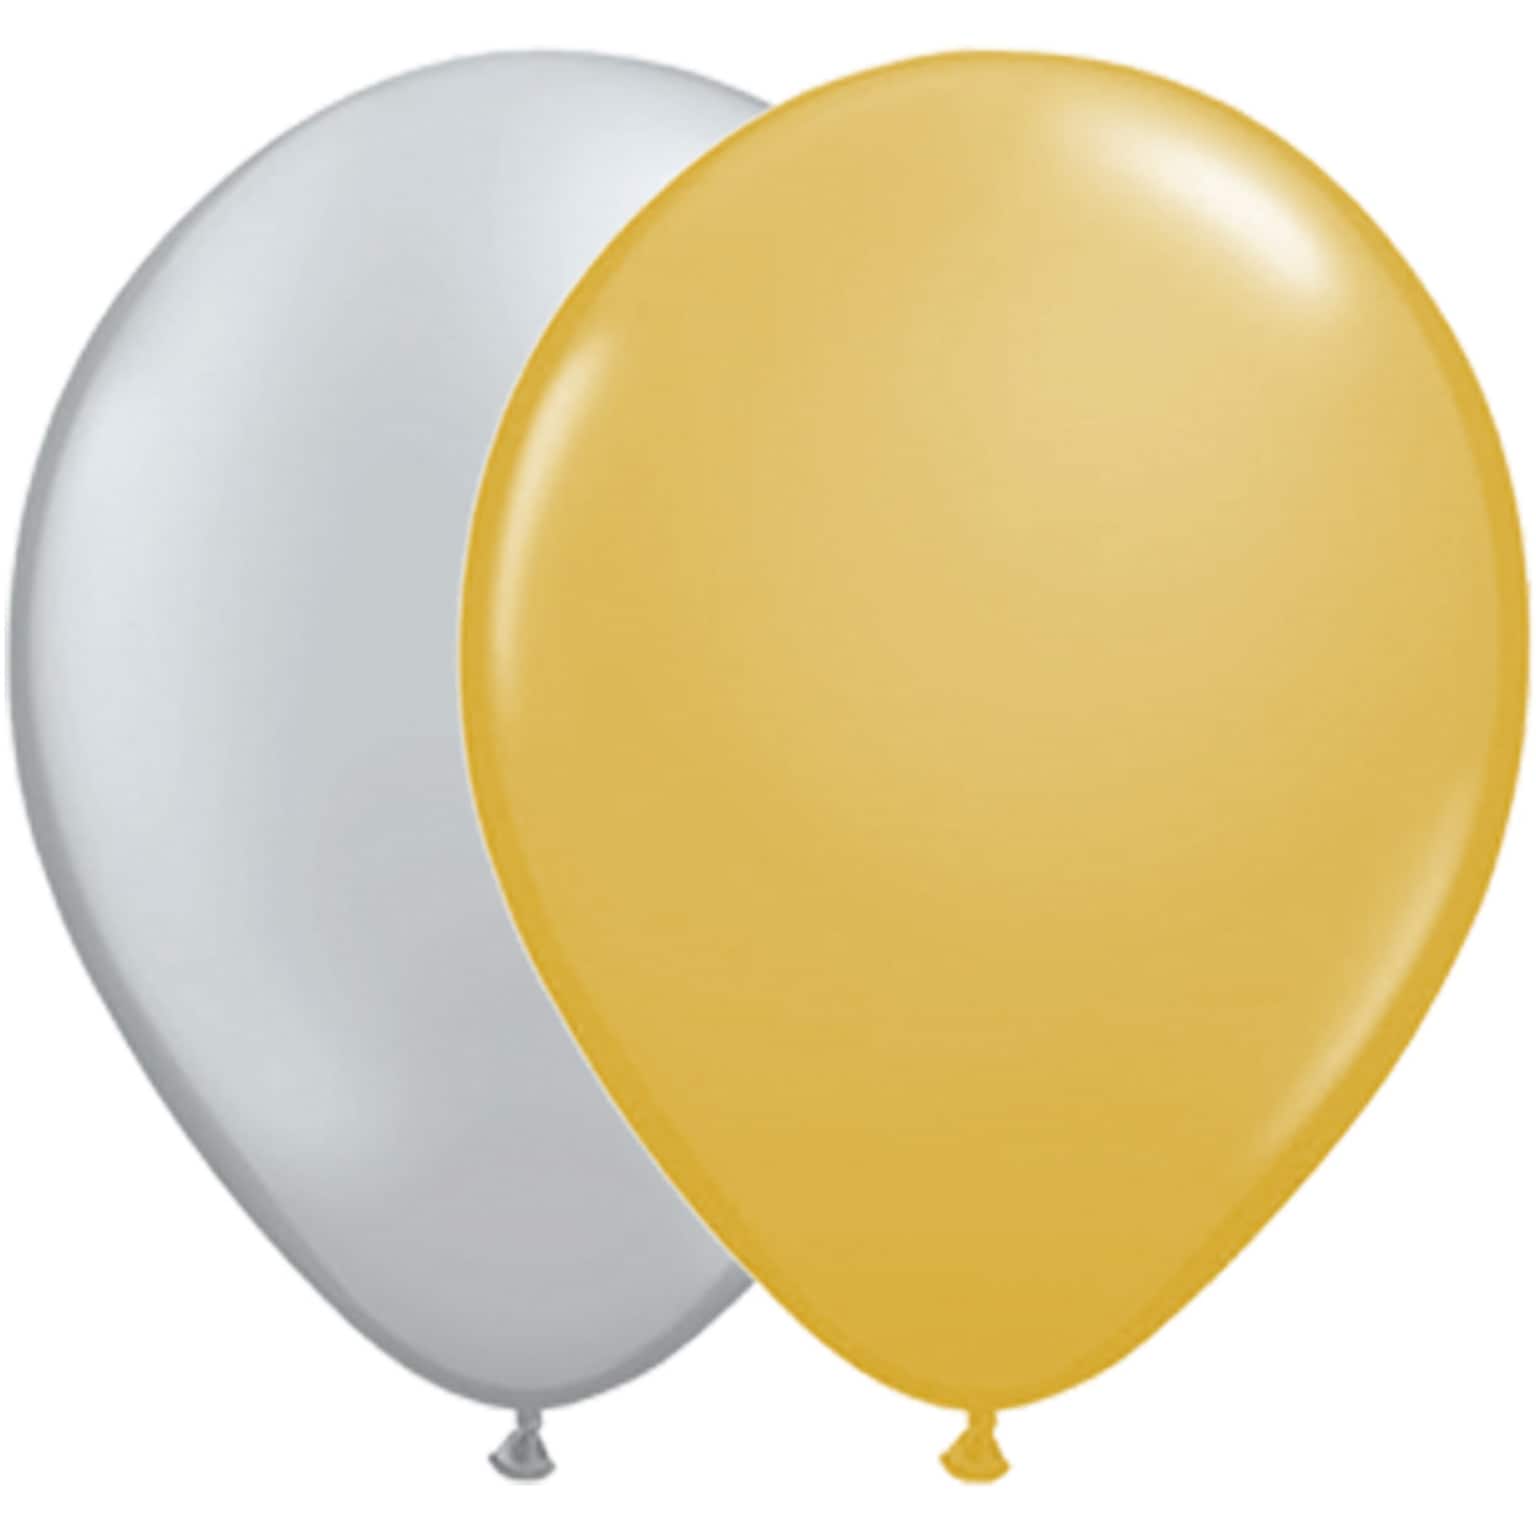 JAM Paper® Party Balloons, 12 Inch Latex Balloons, Silver & Gold Assortment, 36/Pack (377834384A)